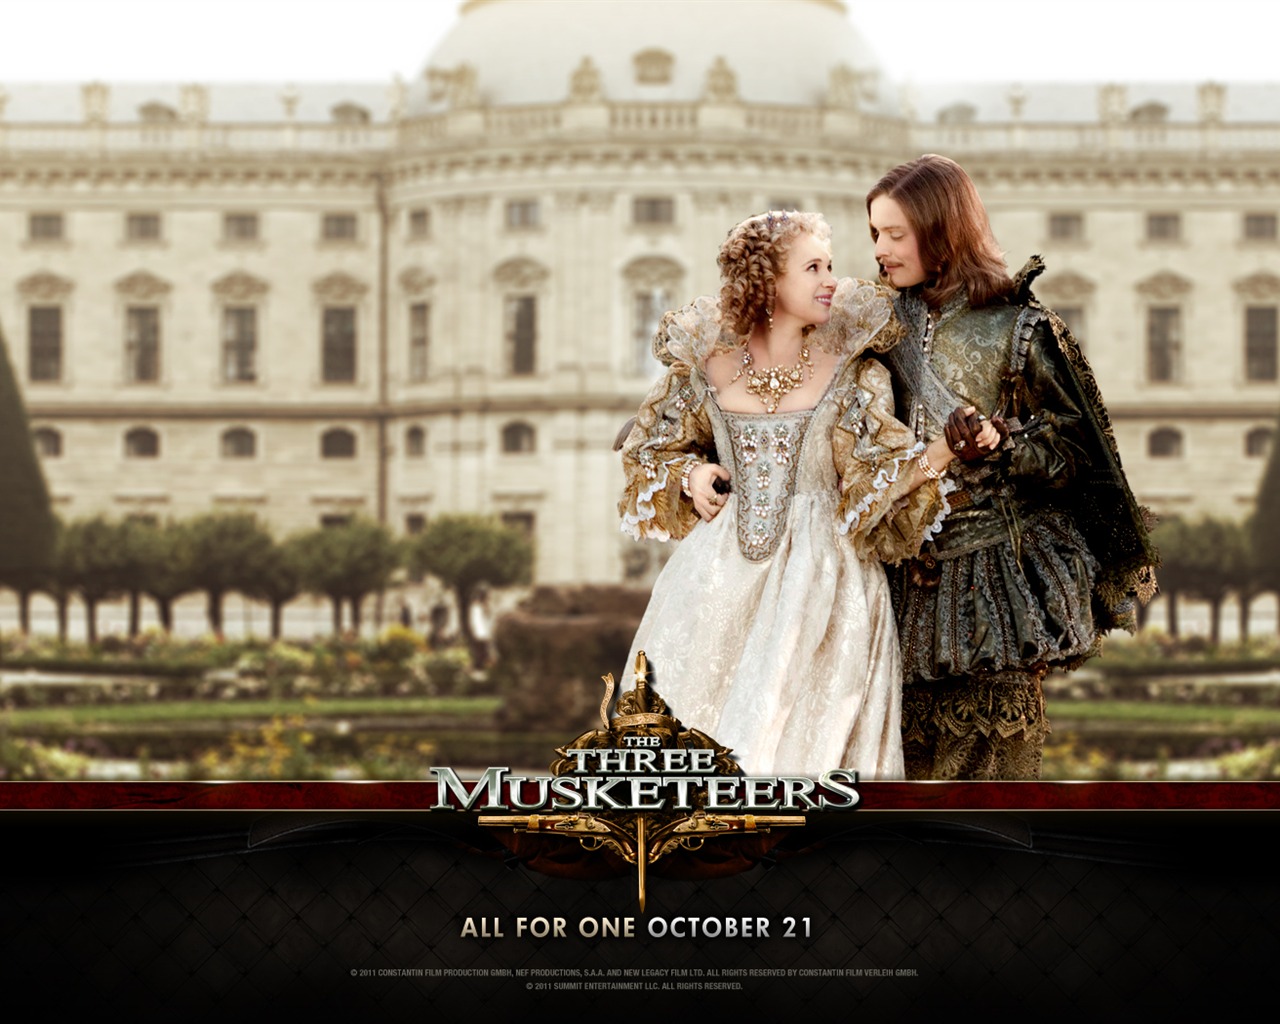 2011 The Three Musketeers wallpapers #4 - 1280x1024